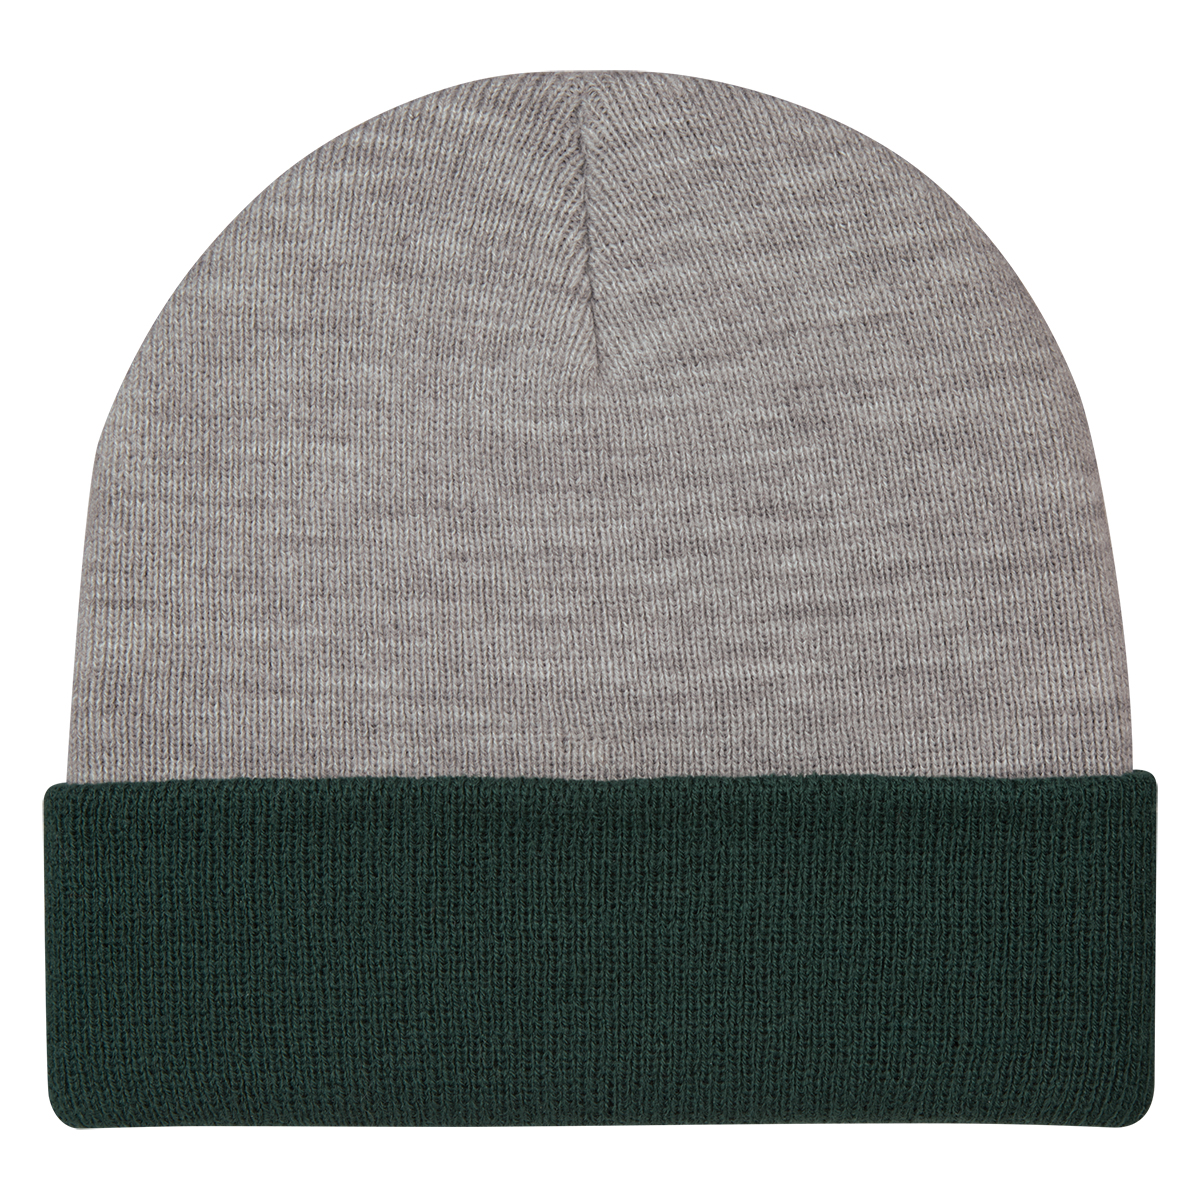 #1067 Two-Tone Knit Beanie With Cuff - Hit Promotional Products